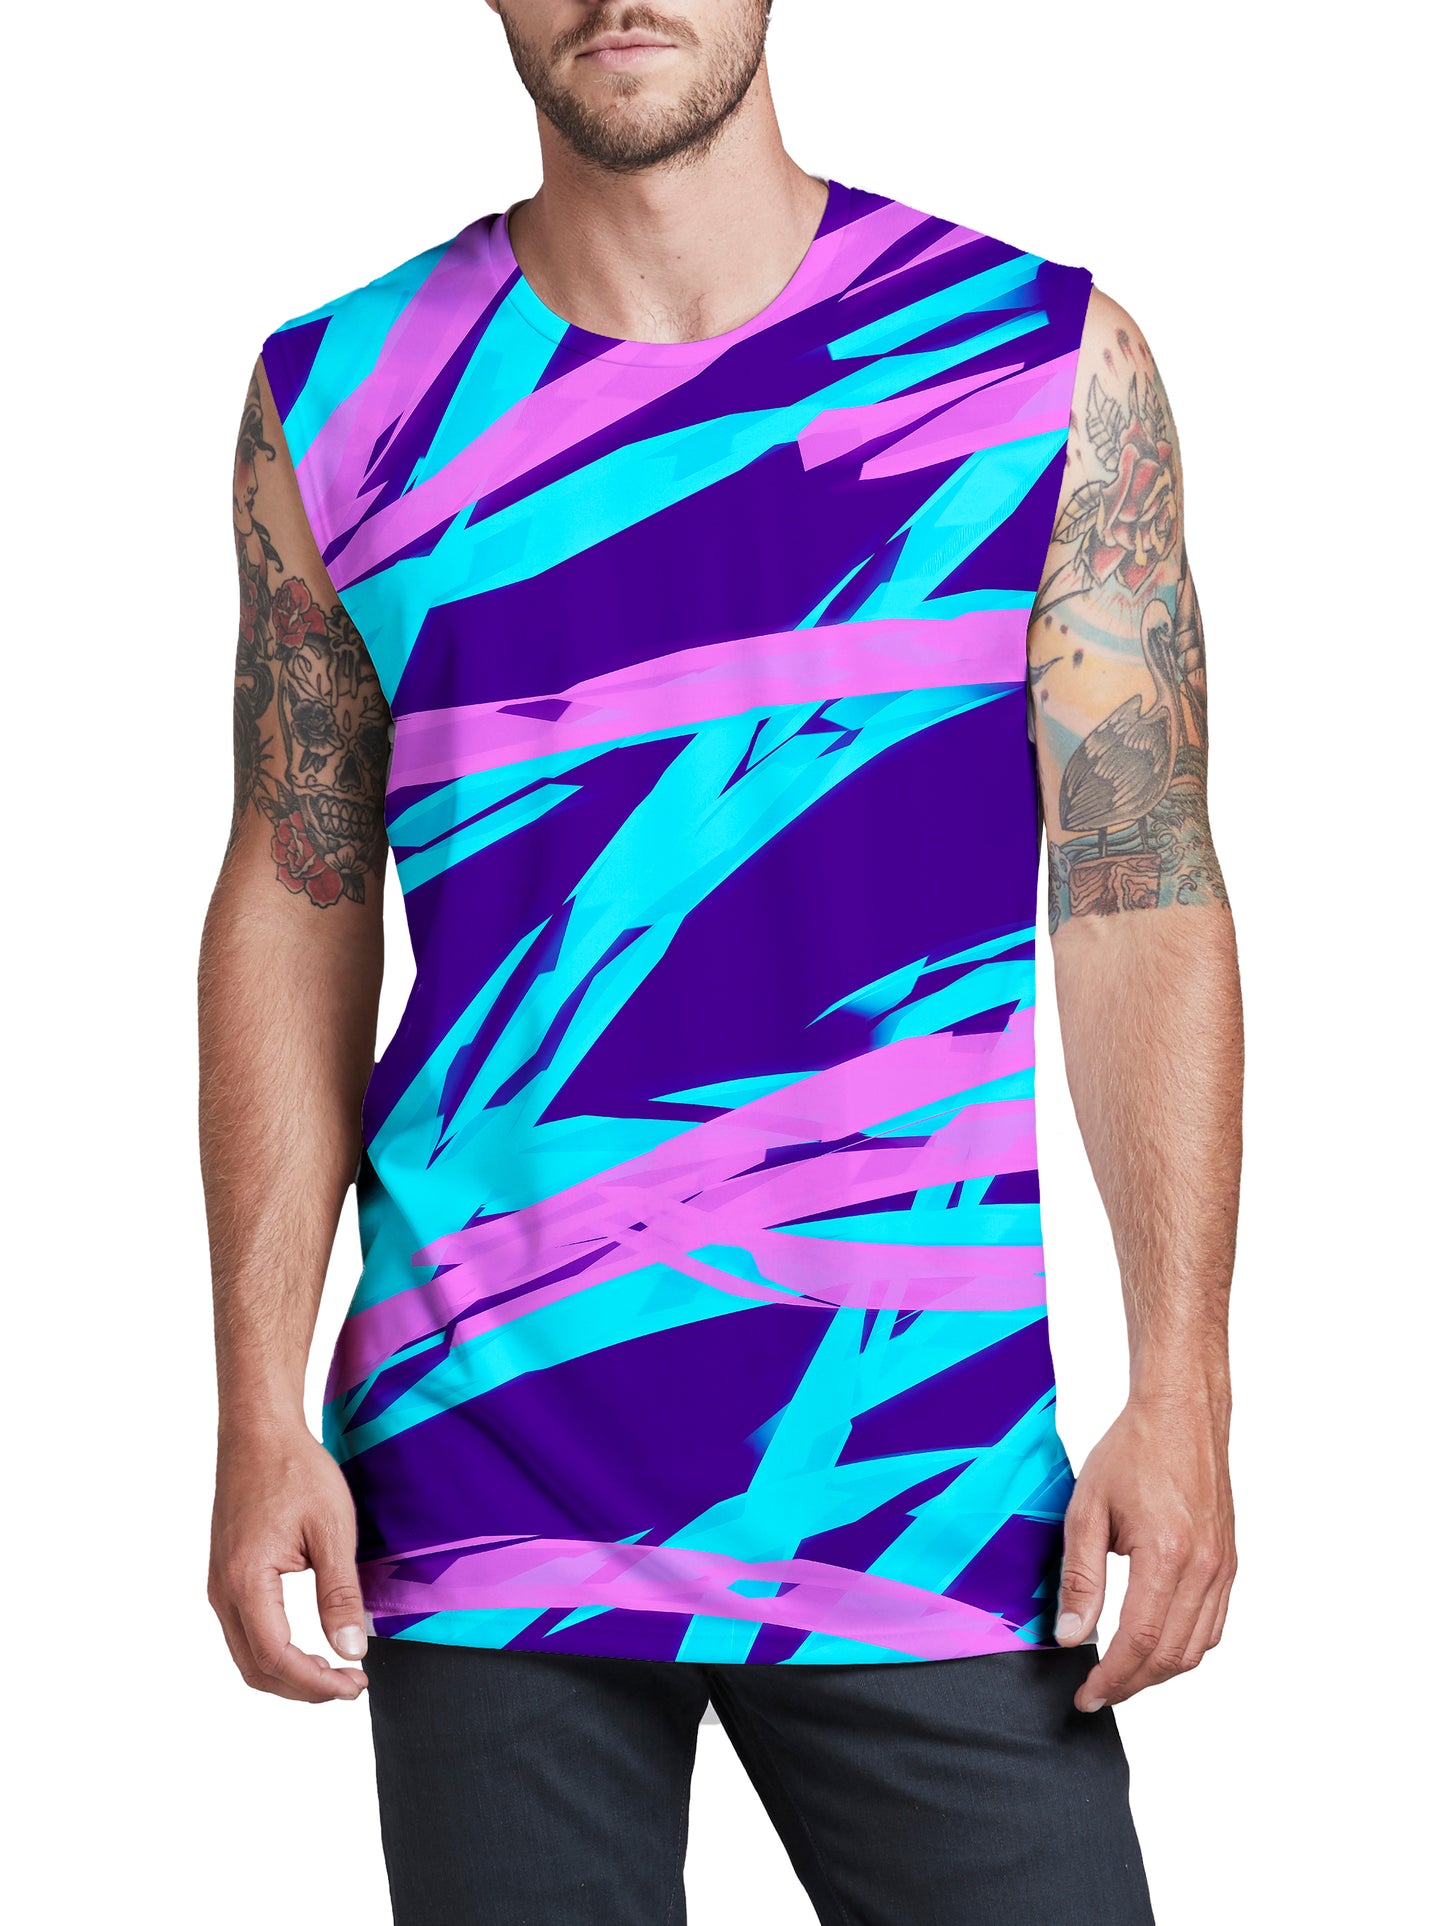 Purple and Blue Rave Abstract Men's Muscle Tank, Big Tex Funkadelic, | iEDM